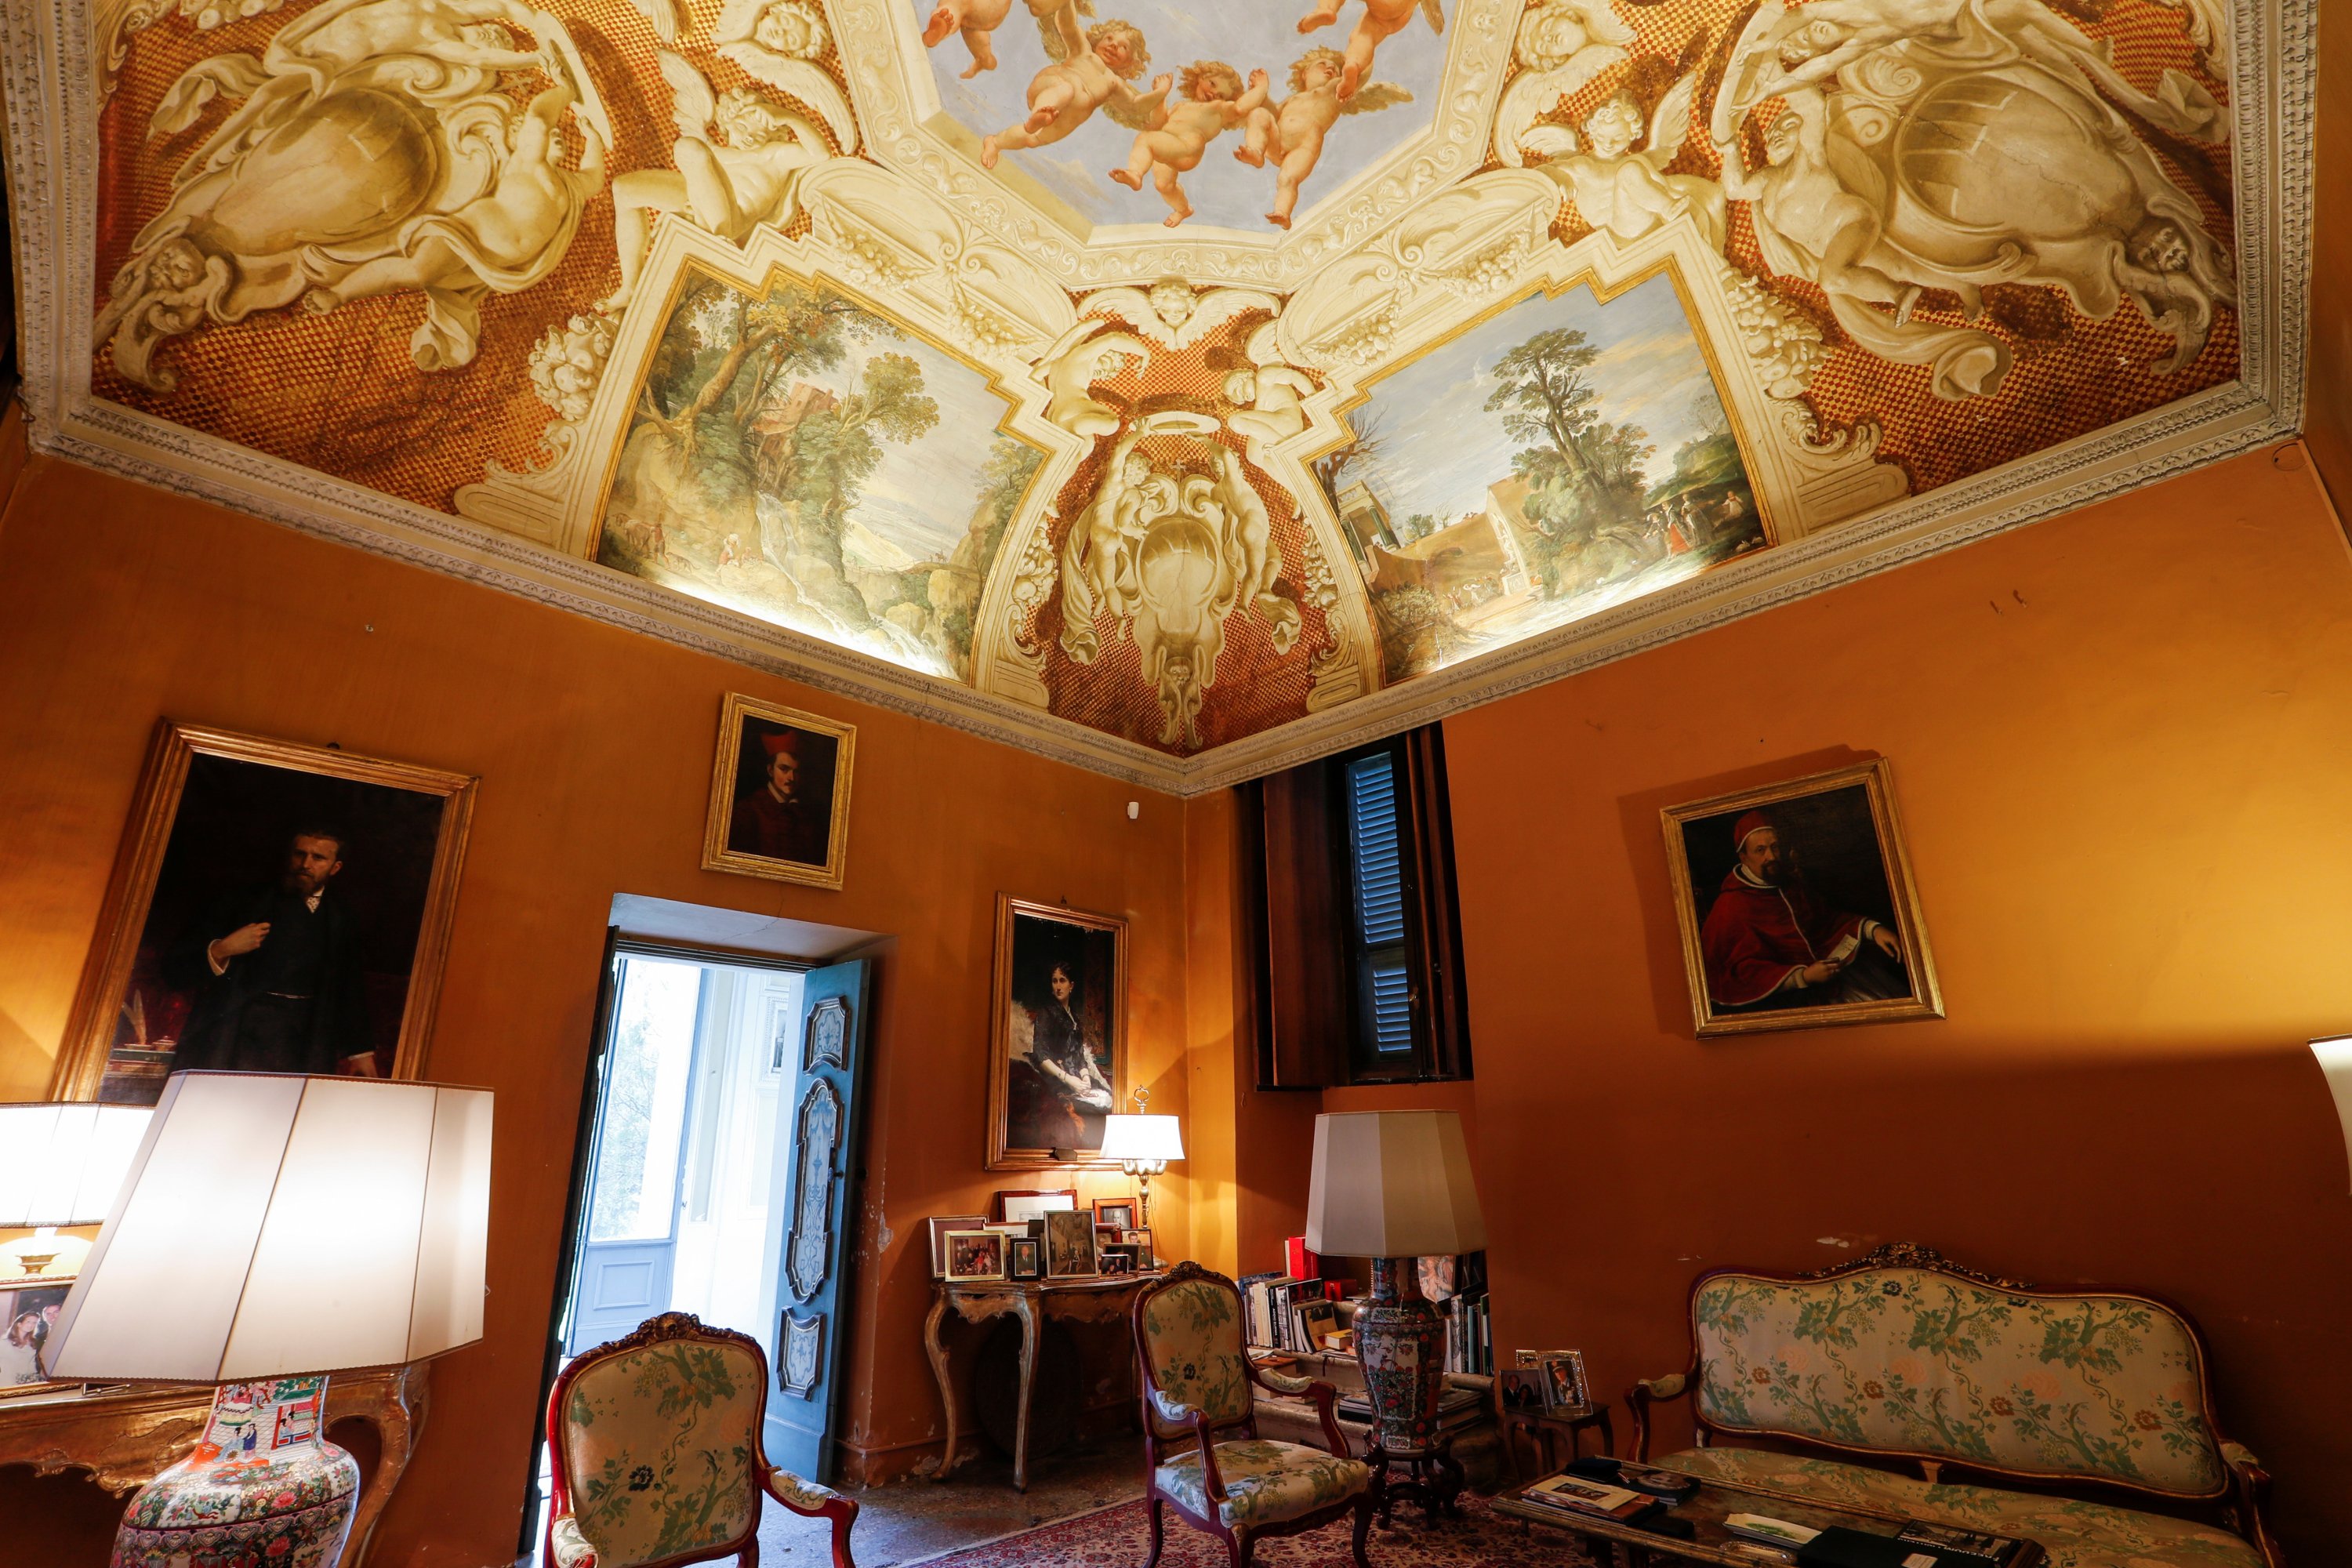 A general view shows a room, with frescoes on the ceiling by Italian artists including Guercino and Domenichino, inside Villa Aurora, in Rome, Italy, Nov. 16, 2021. (REUTERS)